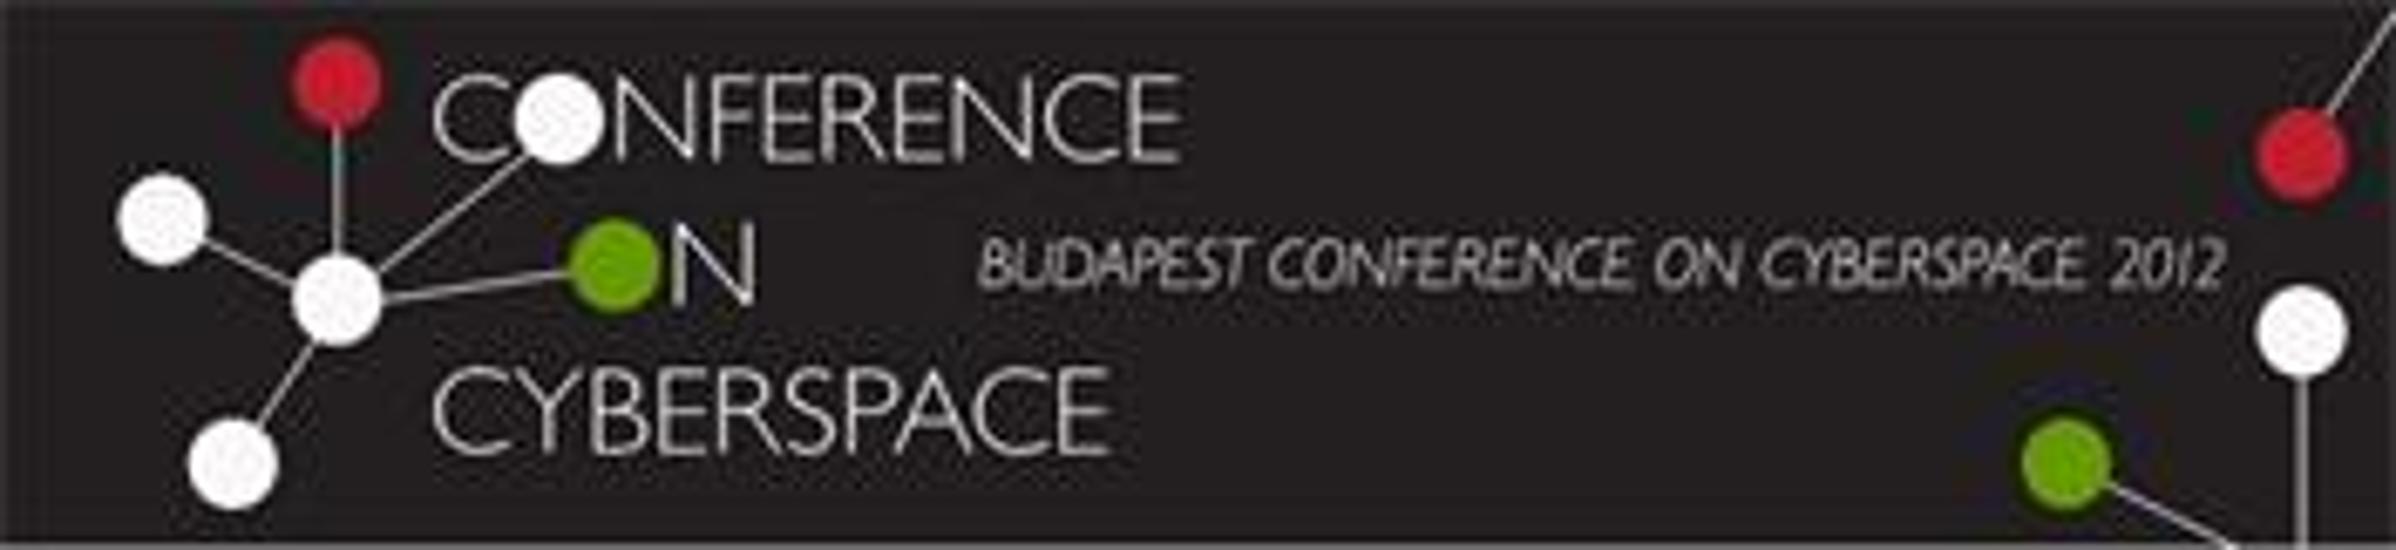 Some Takeaways From The Budapest Conference On Cyberspace